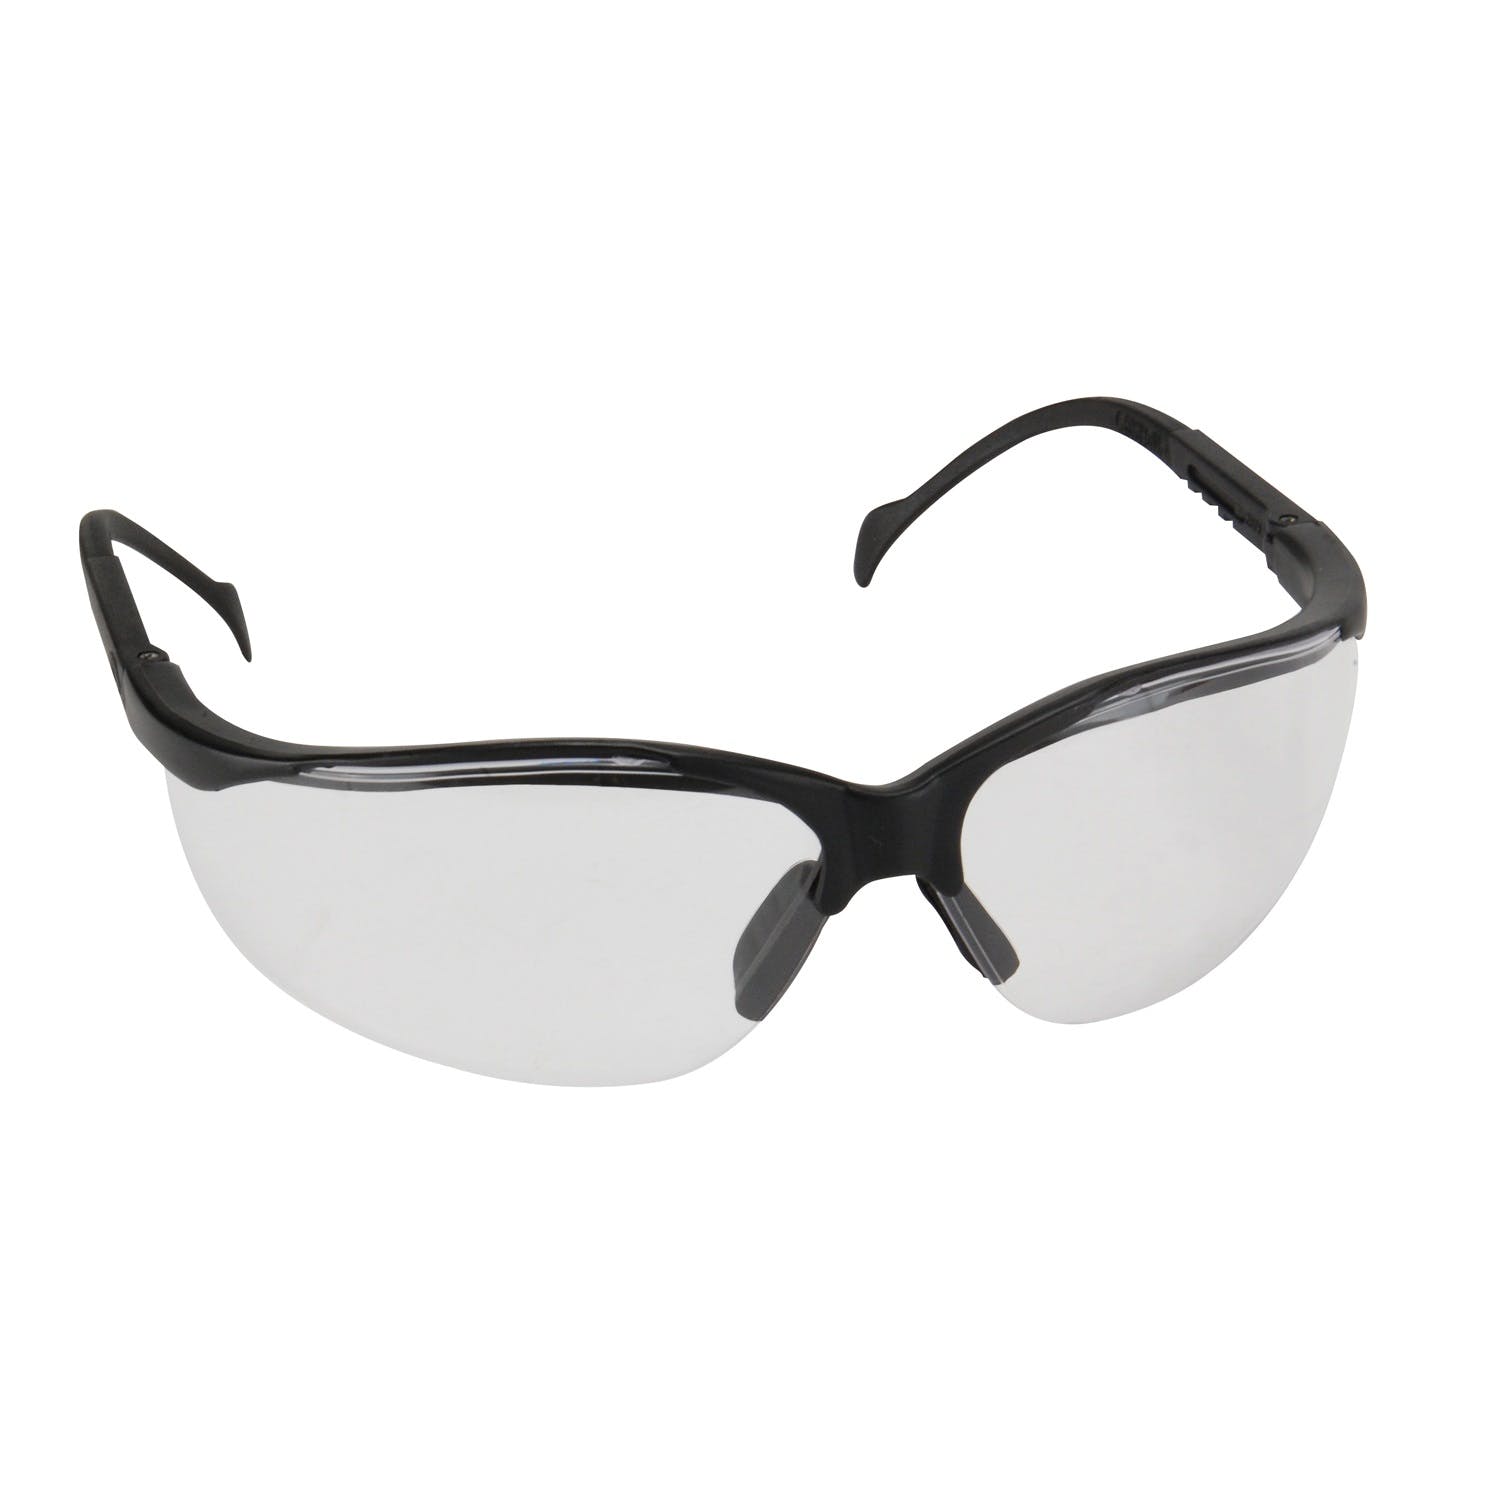 Design Engineering, Inc. 70513 Safety Glasses - Clear Lens